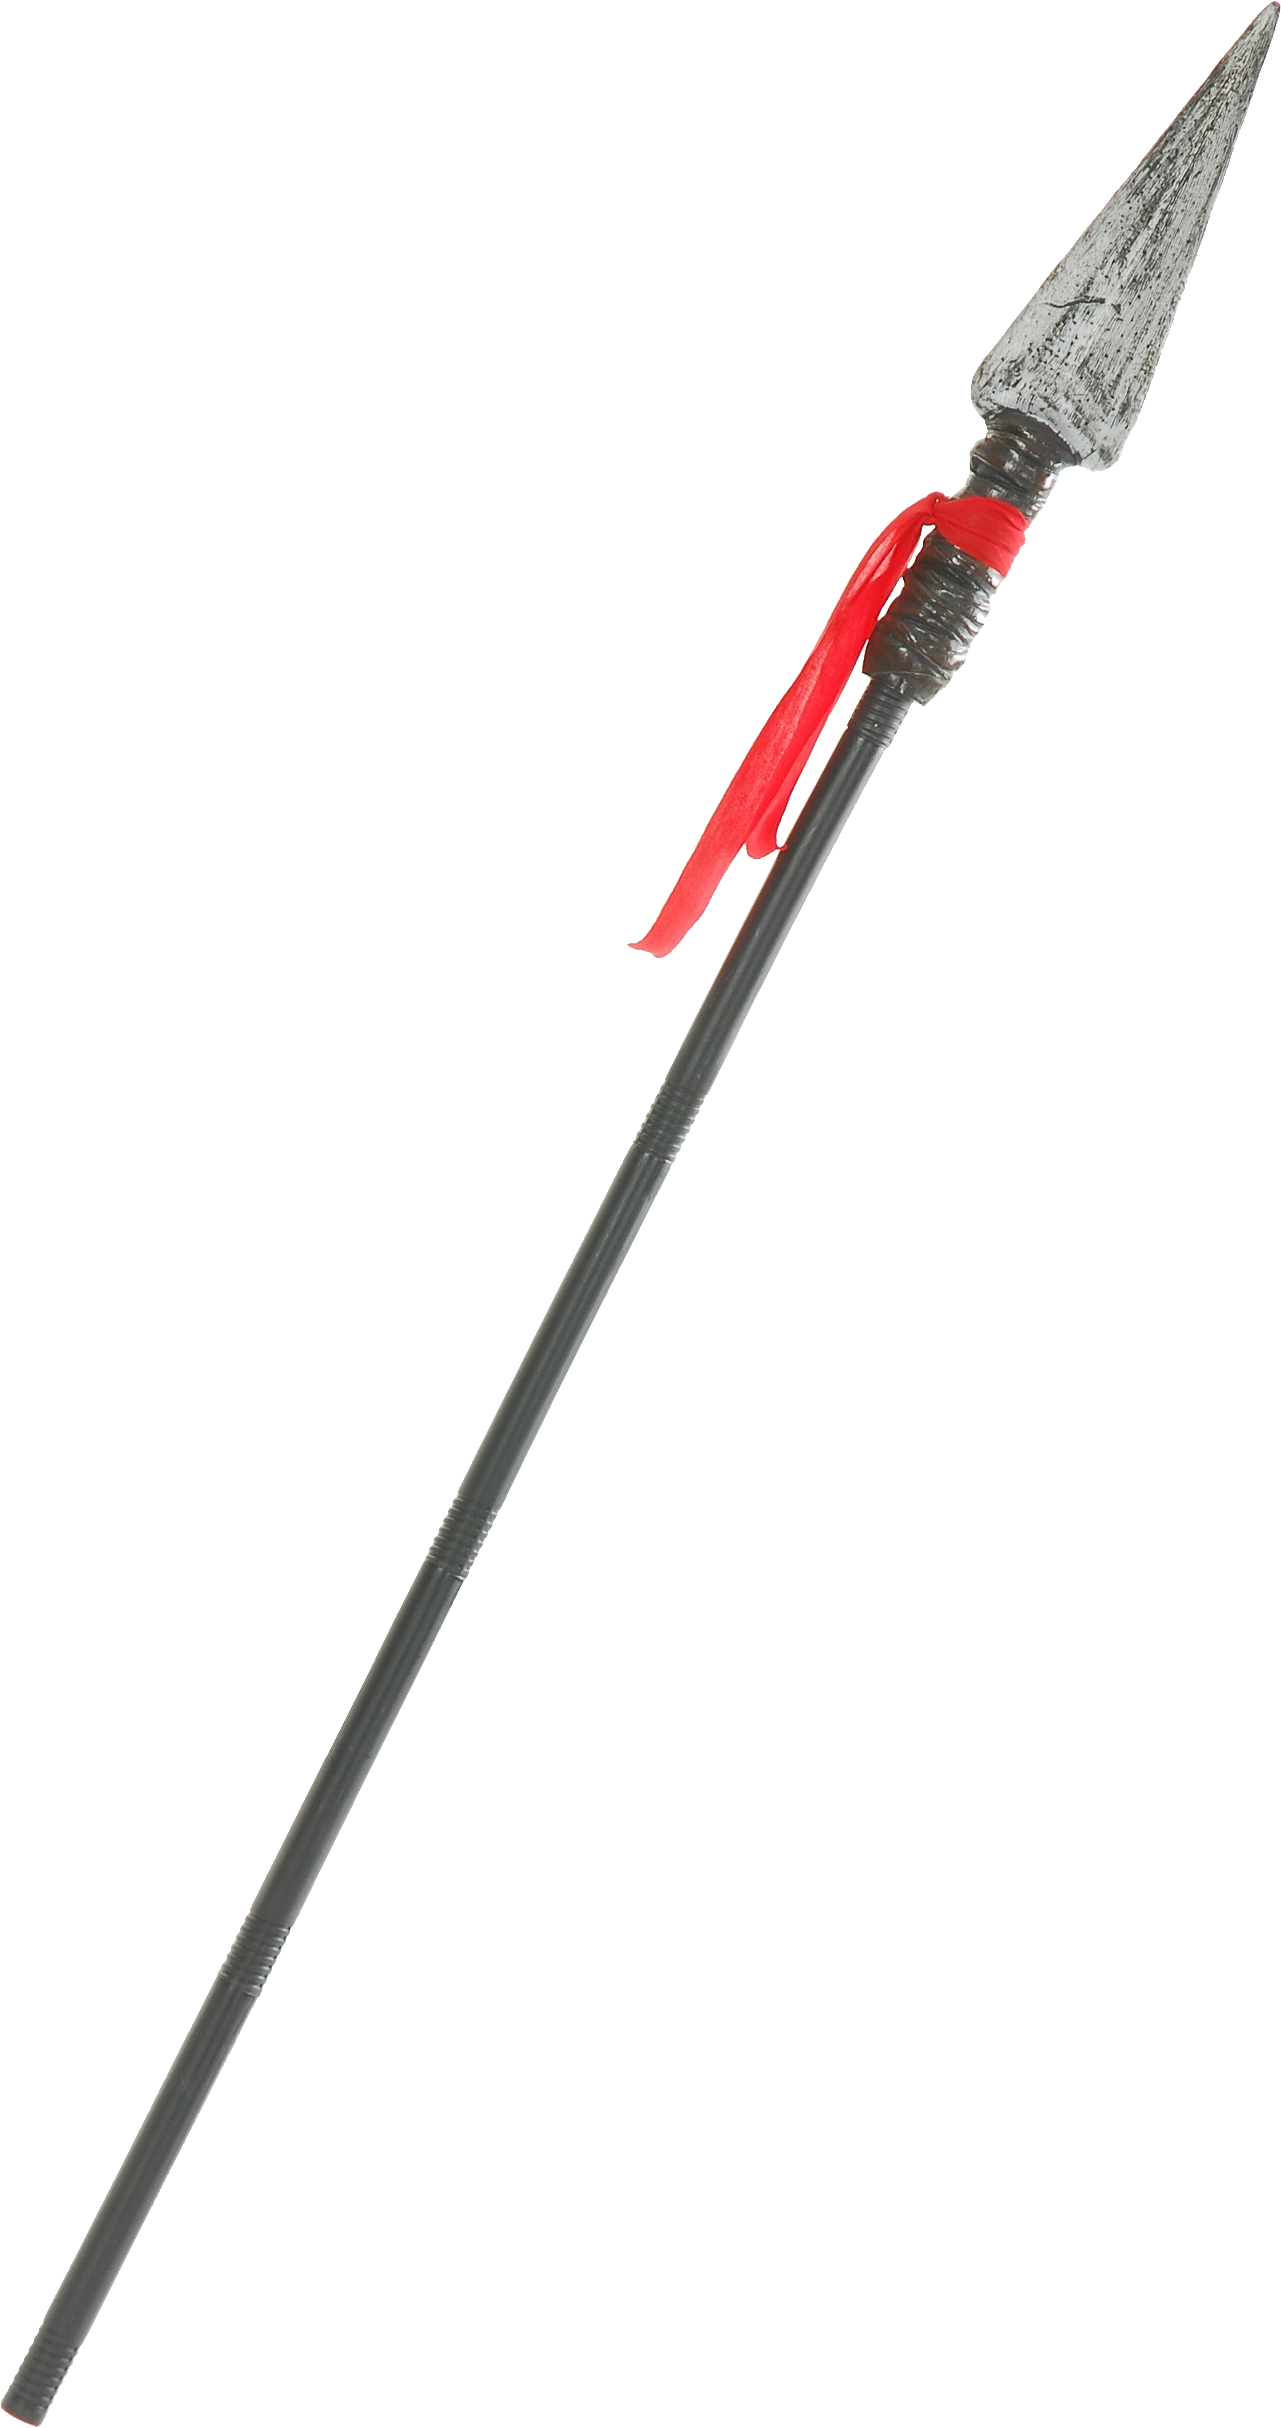 A Black And Red Wand